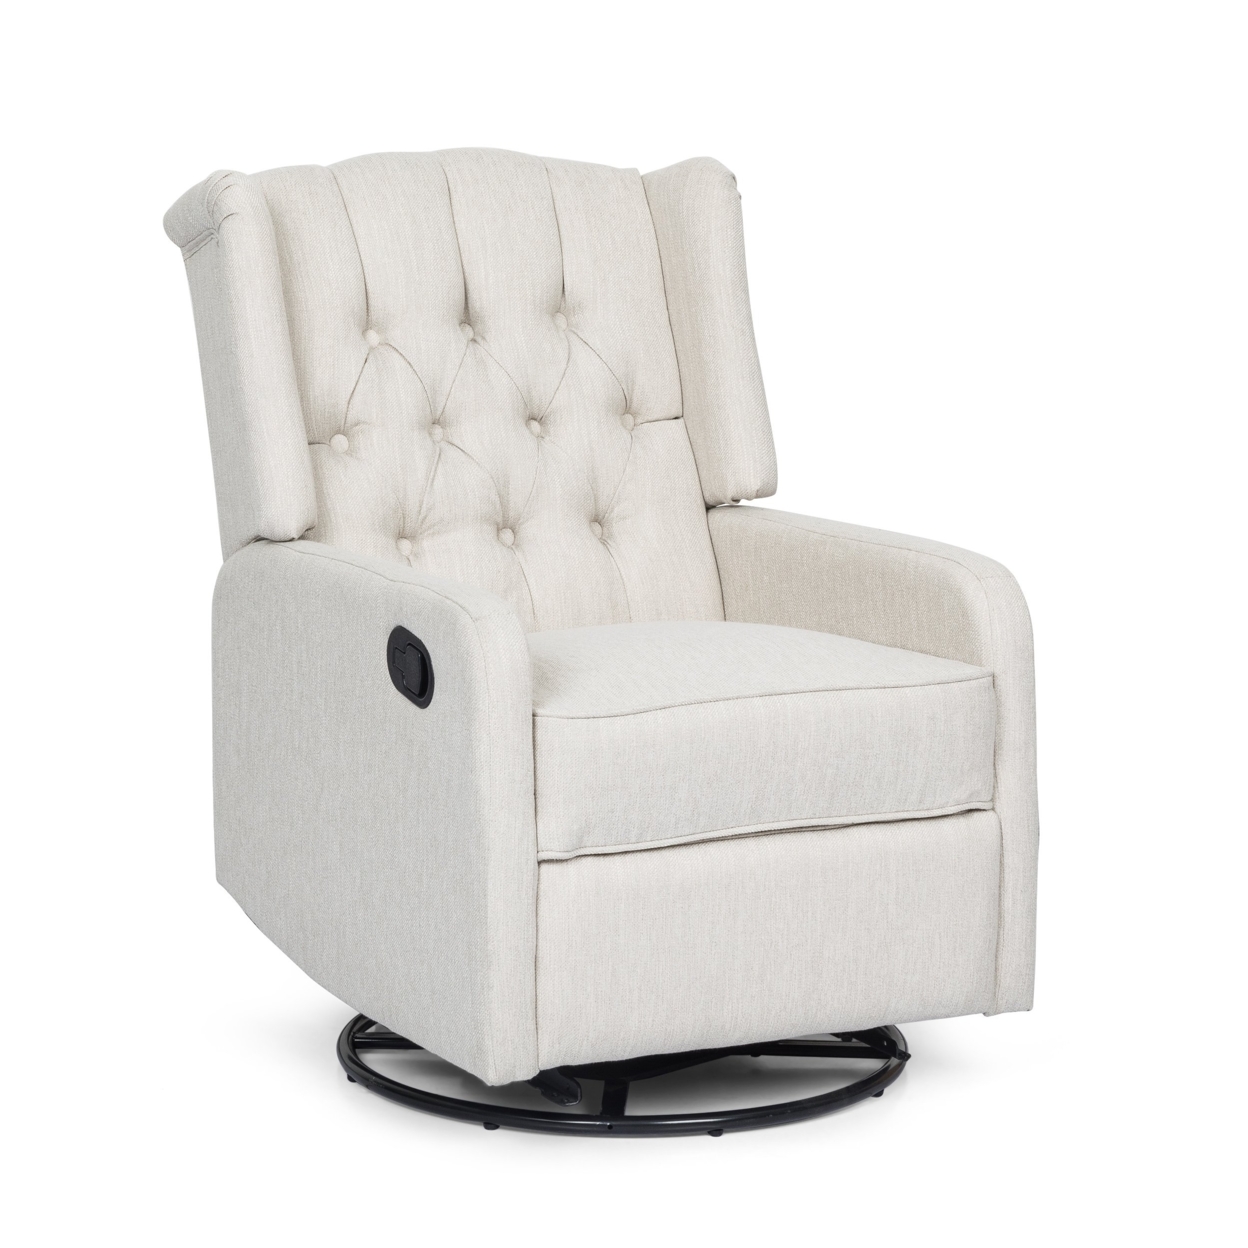 Houck Contemporary Tufted Wingback Swivel Recliner - Black/beige